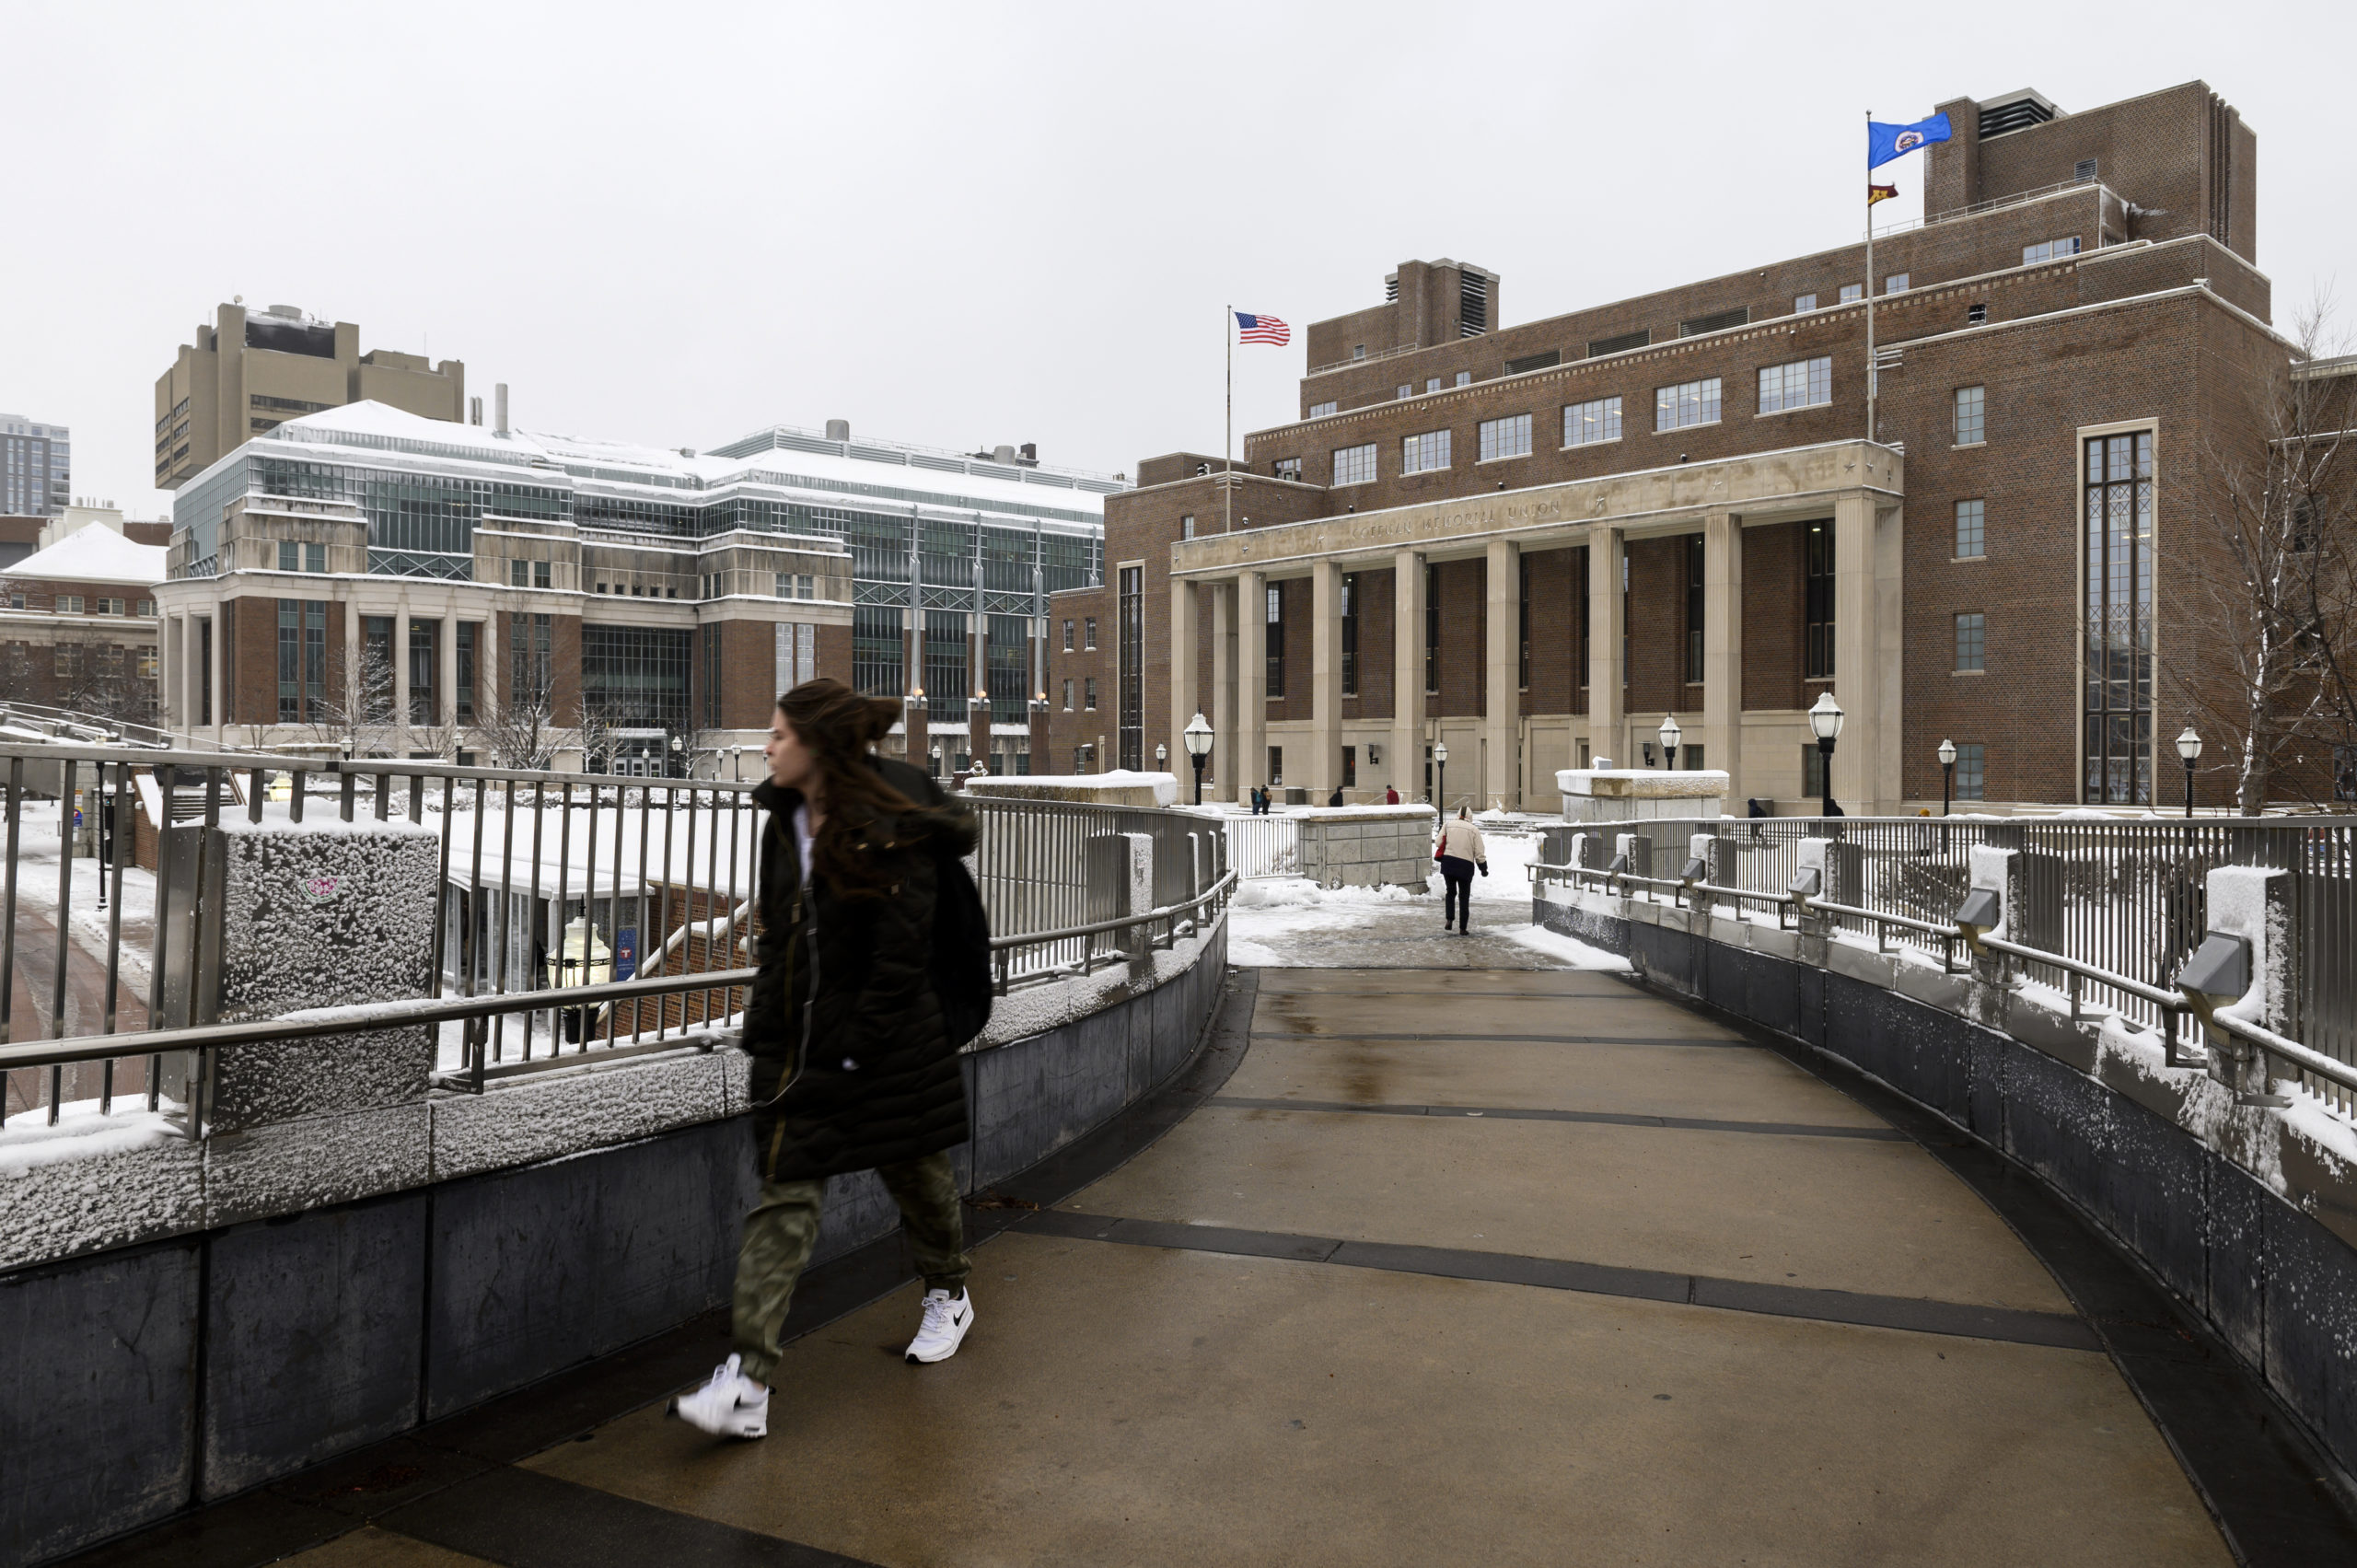 A pedestrian passes by on the University of Minnesota campus on April 11, 2019 in Minneapolis, Minnesota. The week in Minnesota started with two sunny Spring days and has since turned to blizzard conditions. (Photo by Stephen Maturen/Getty Images)